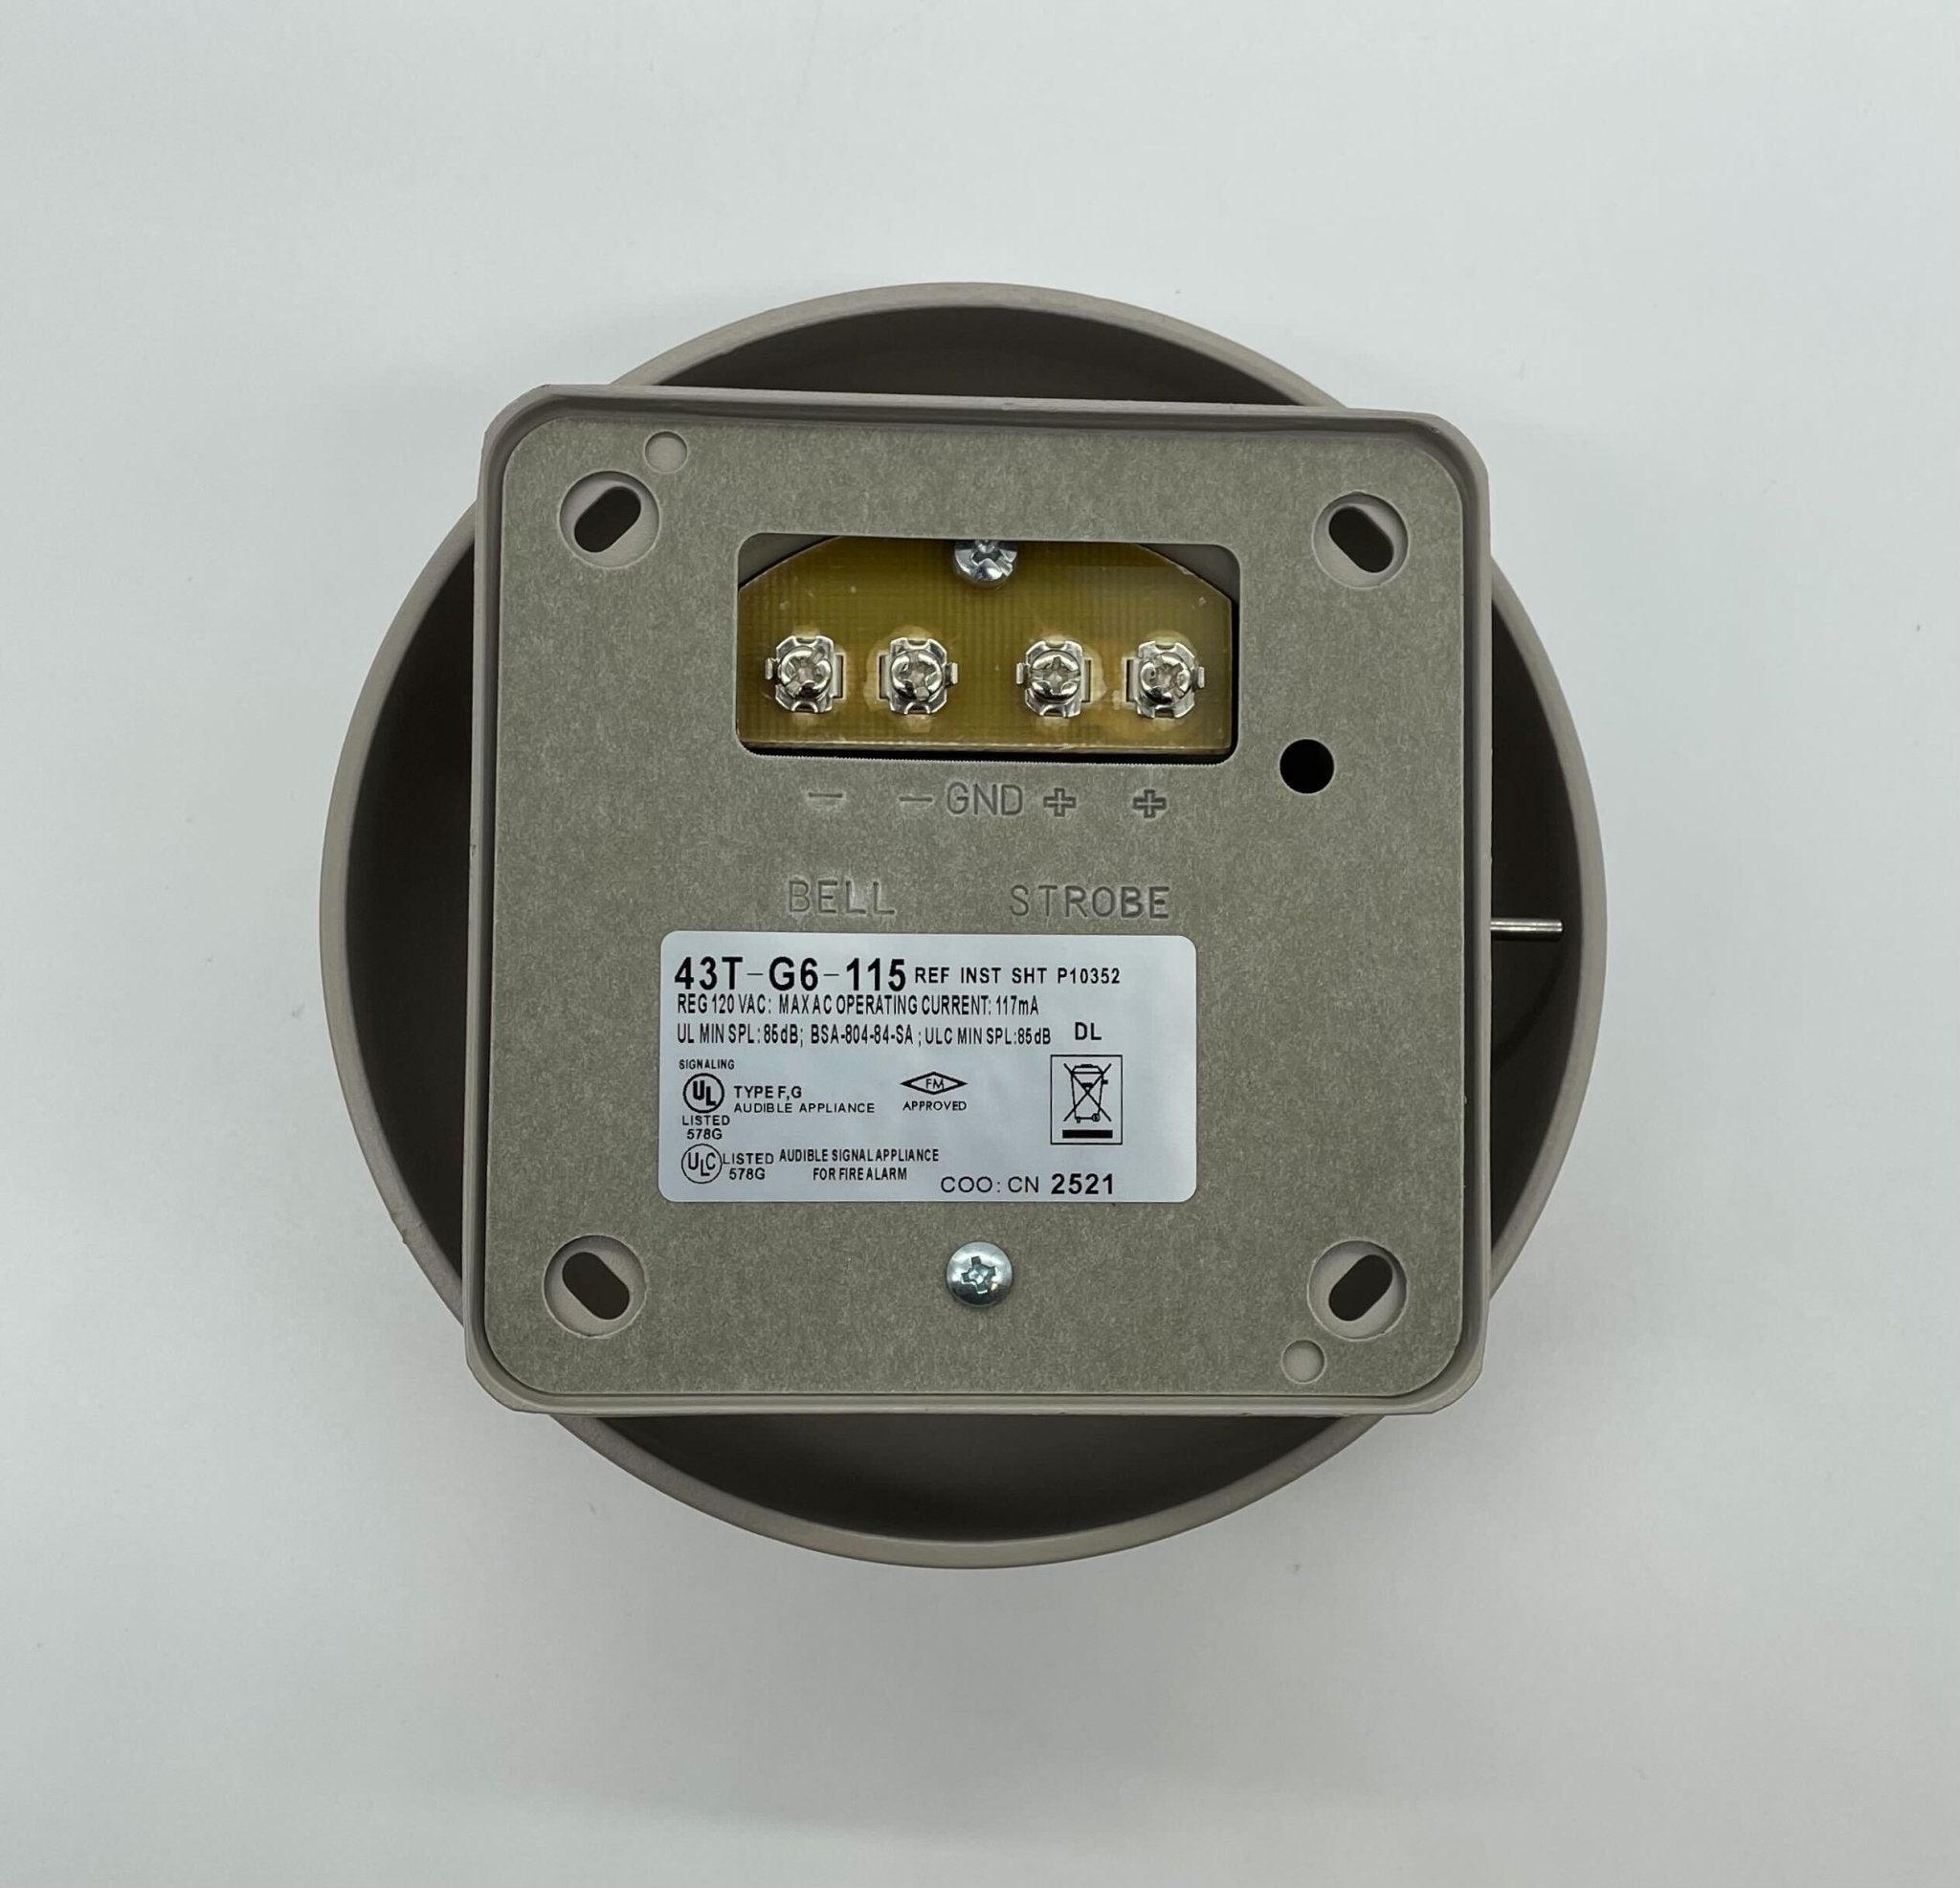 Wheelock 43T-G6-115-S - The Fire Alarm Supplier